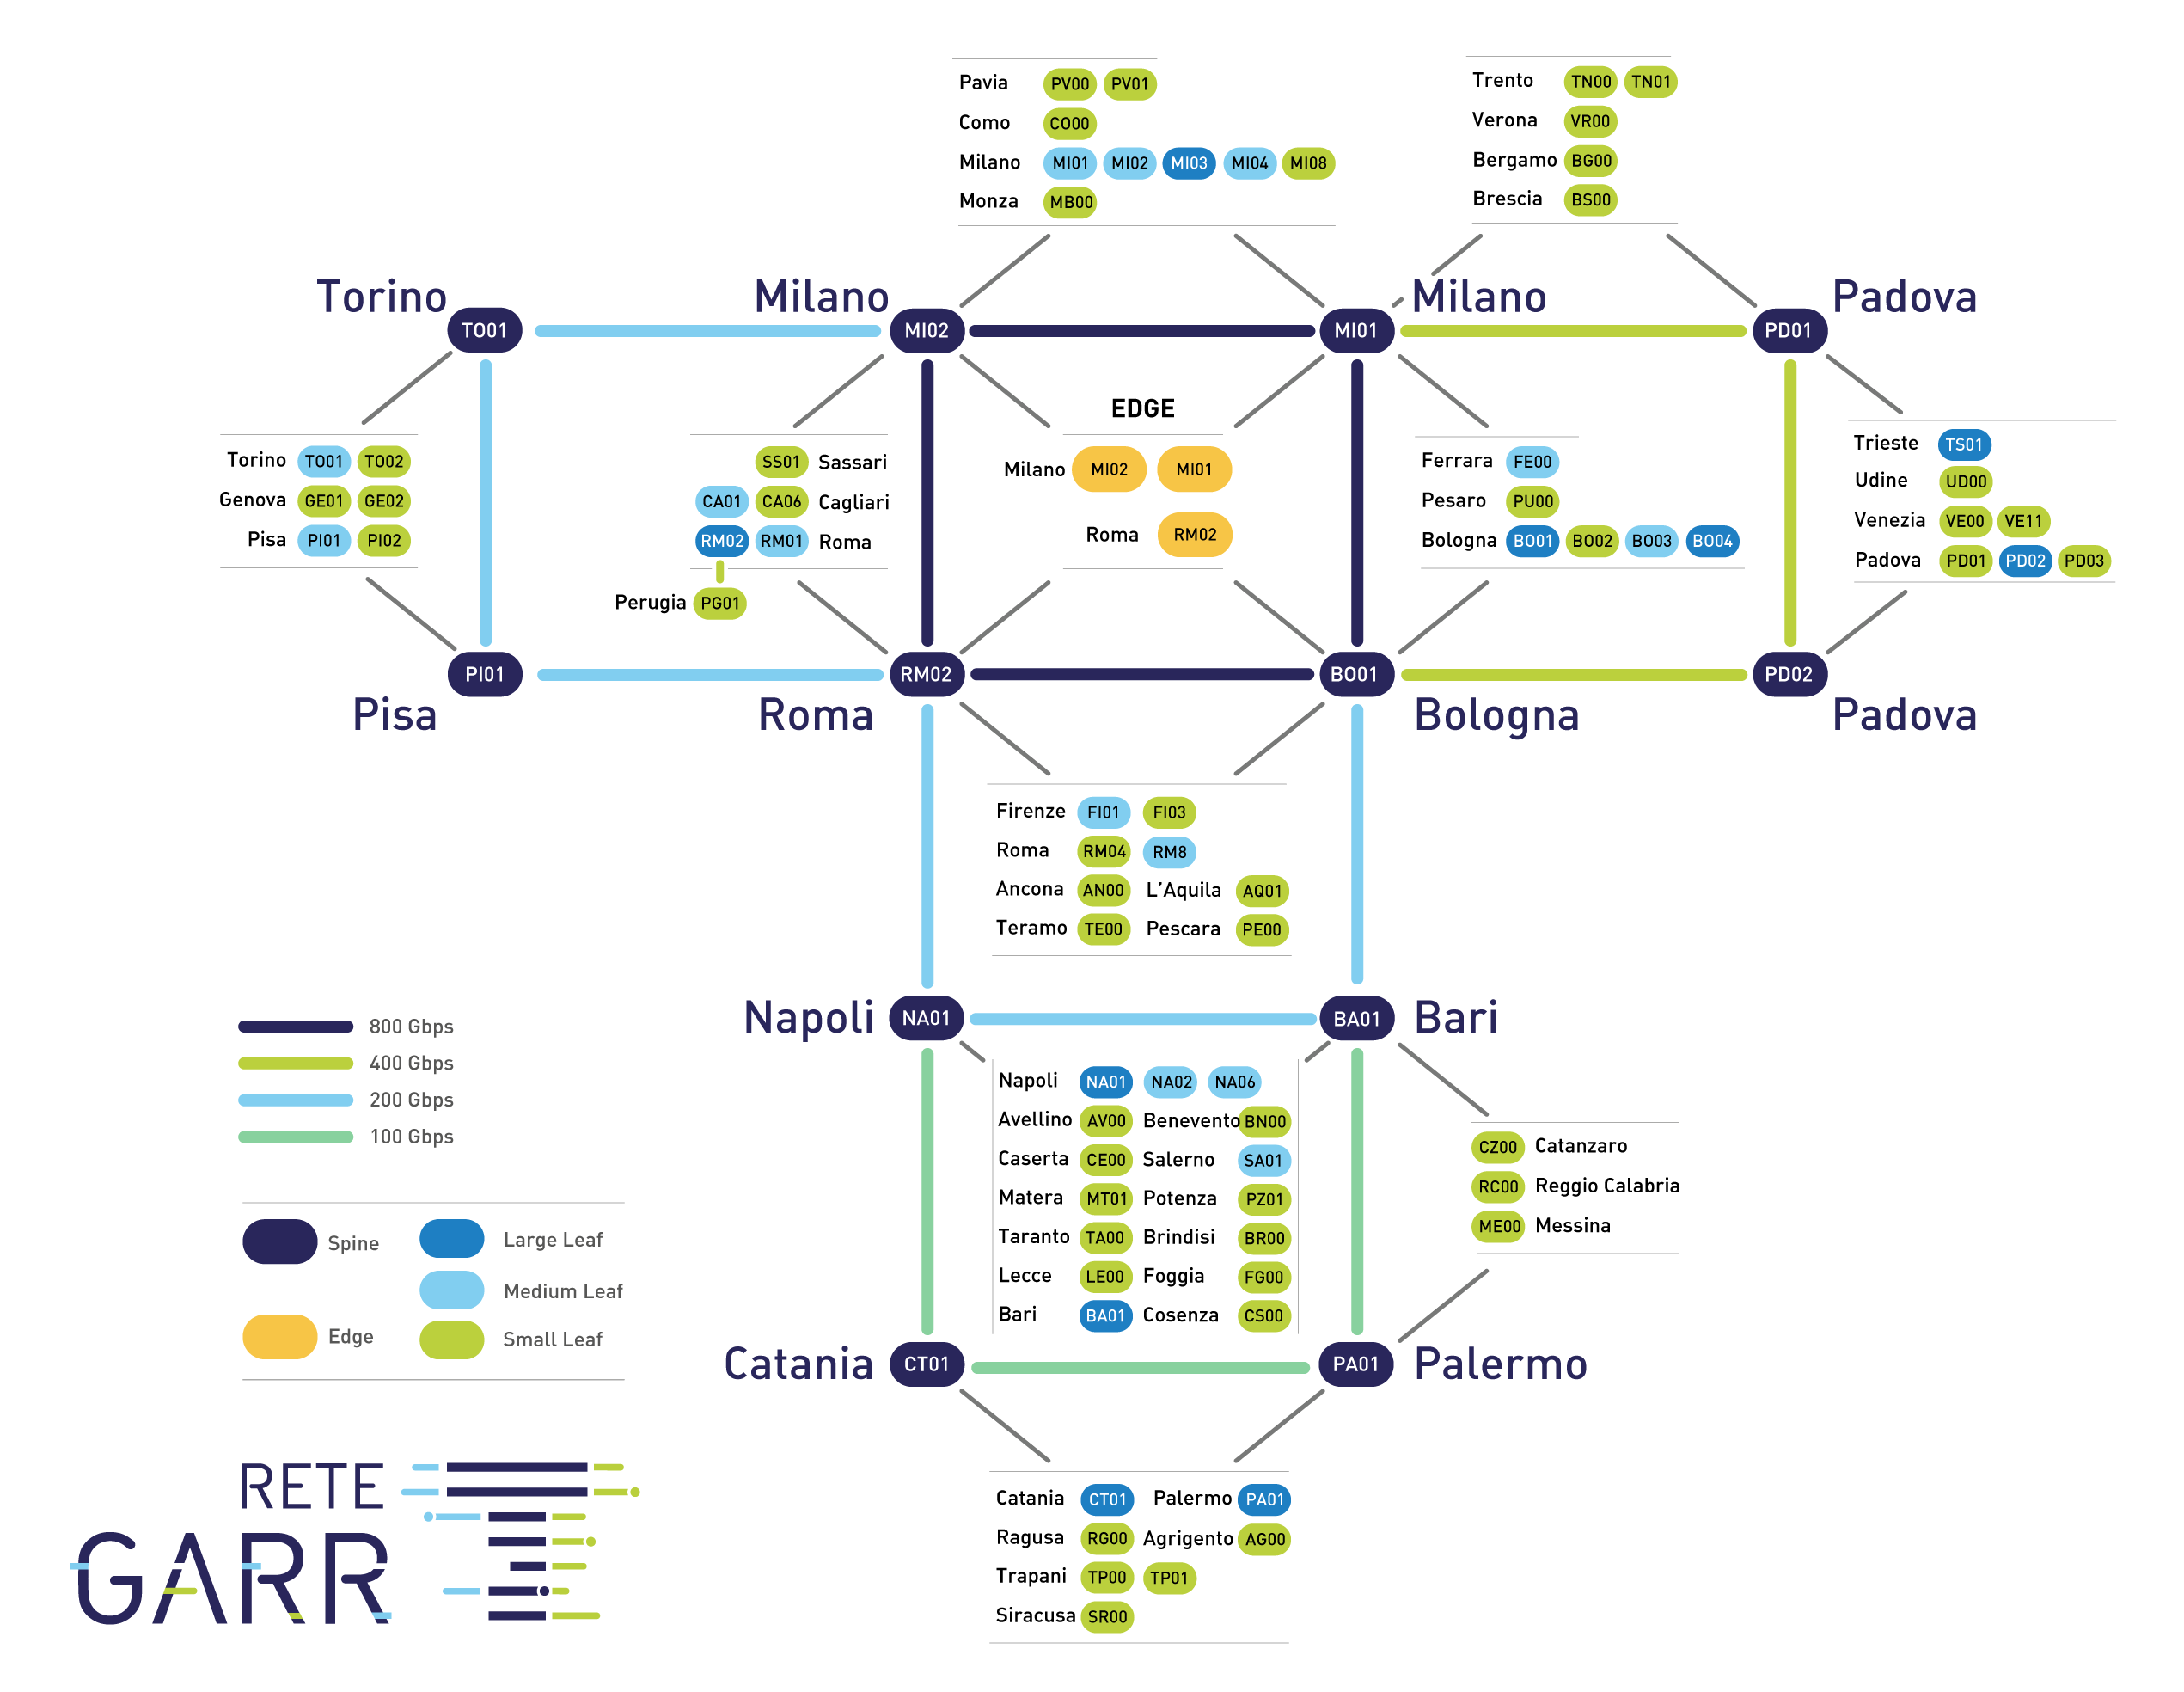 IP topology of the GARR-T network